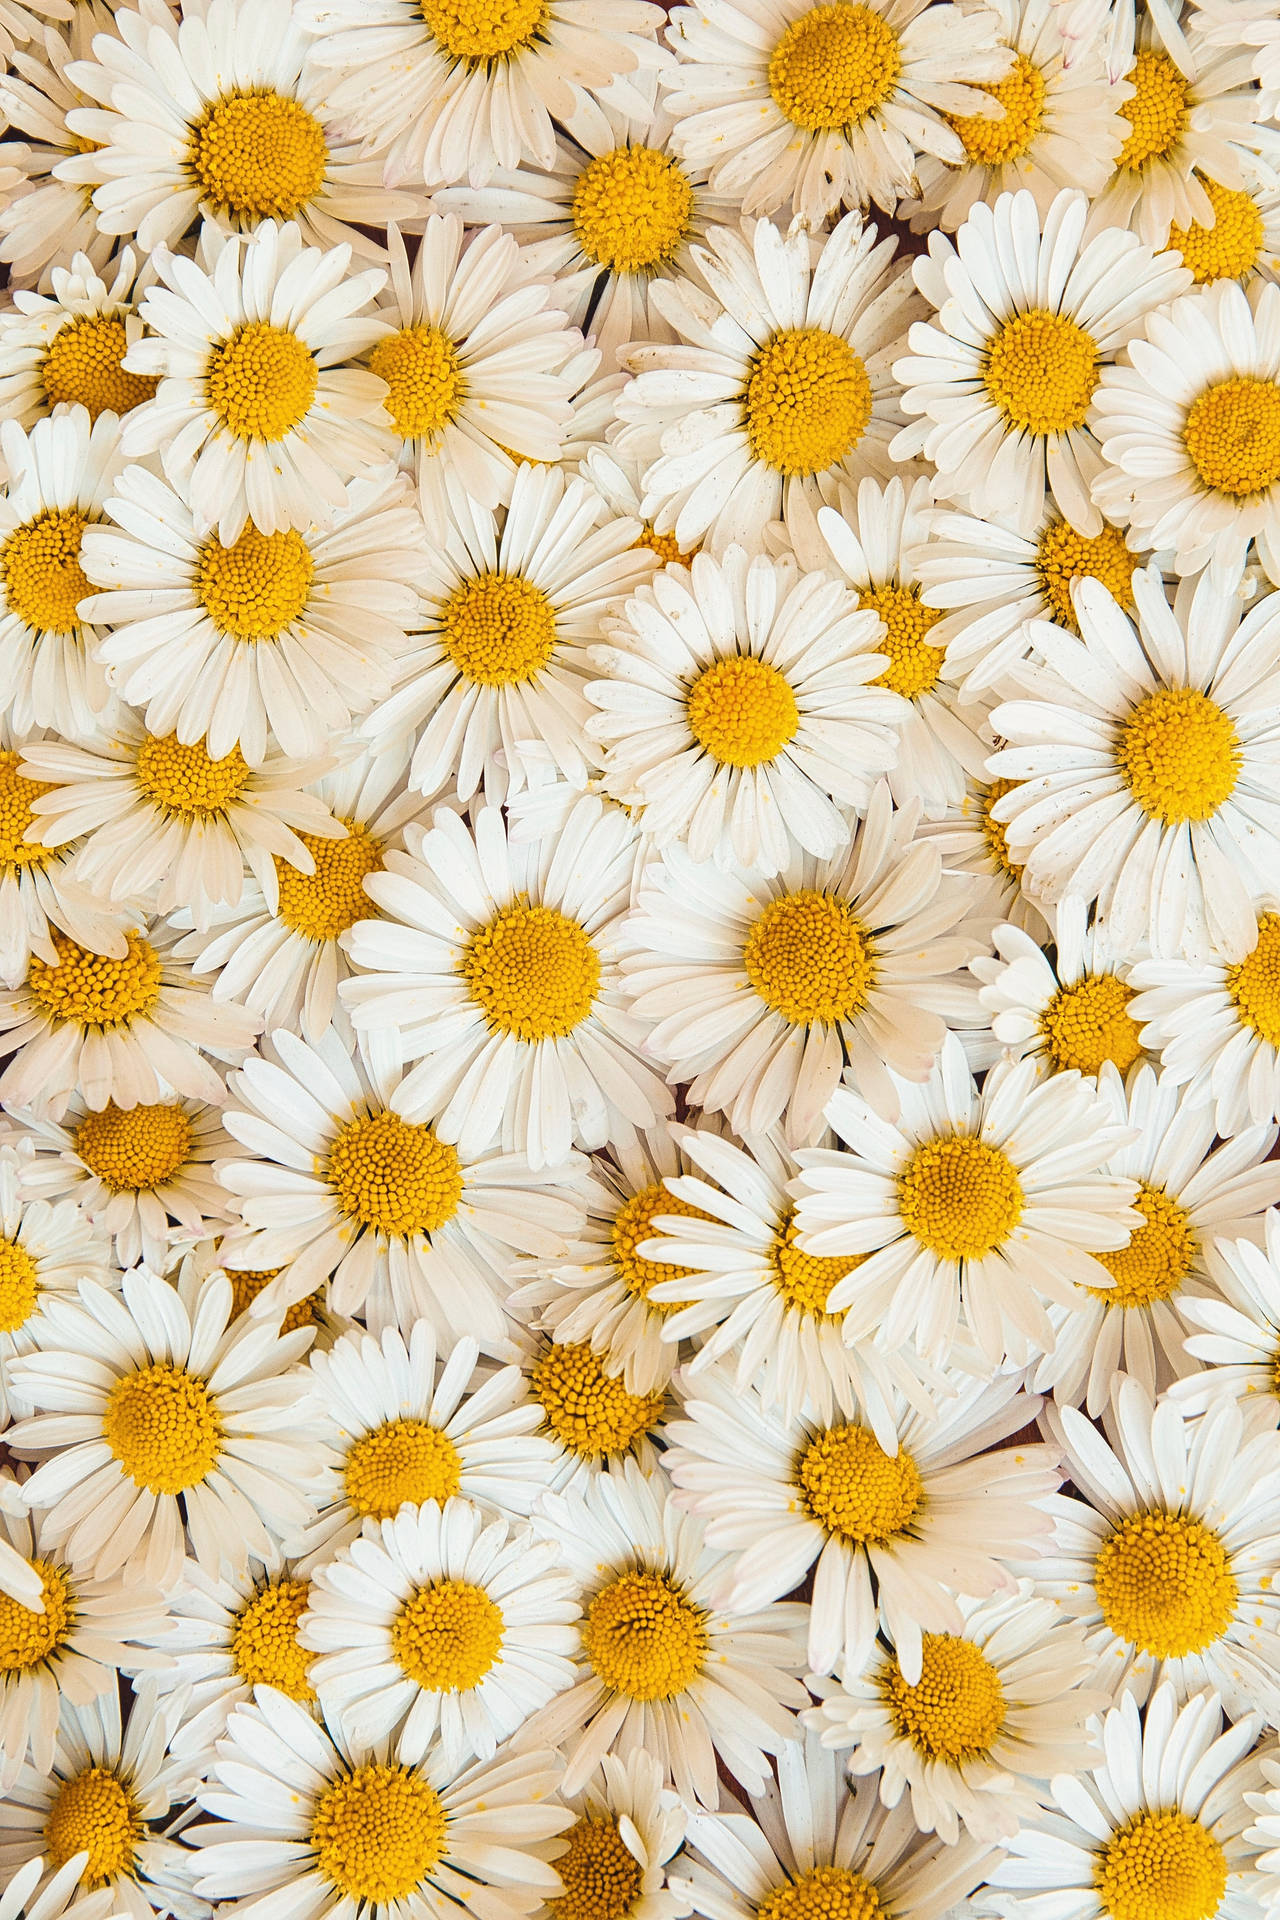 Daisy 3057X4586 Wallpaper and Background Image